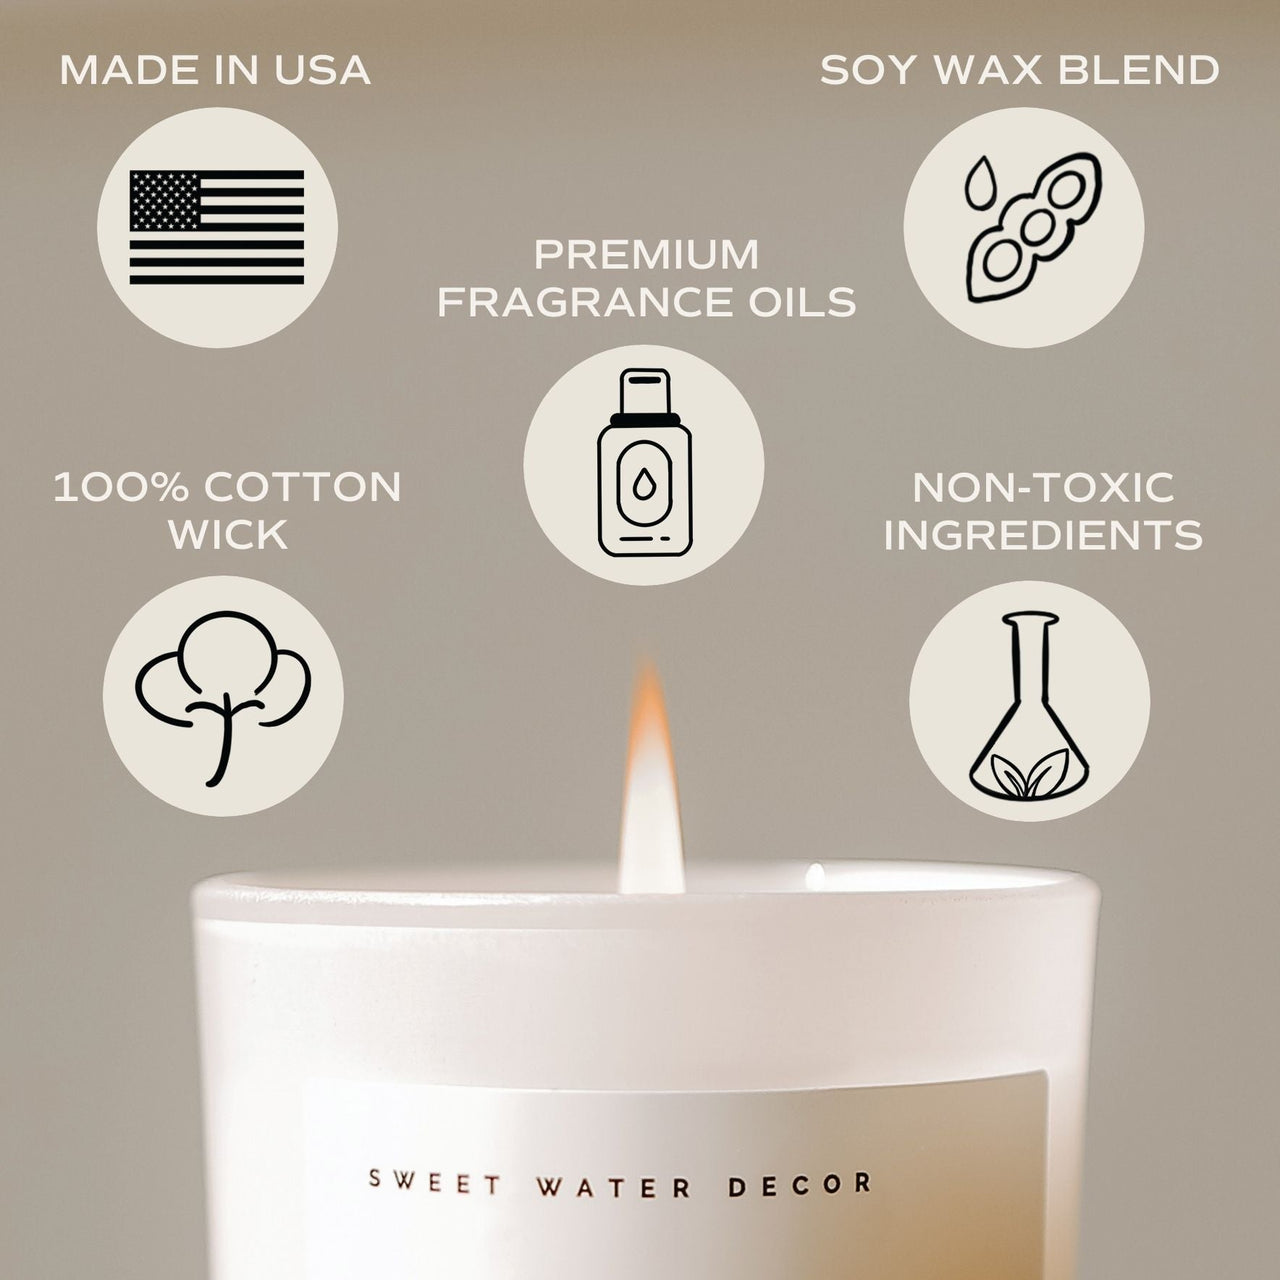 Relaxation Soy Candle - White Jar - 11 oz - Tony's Home Furnishings